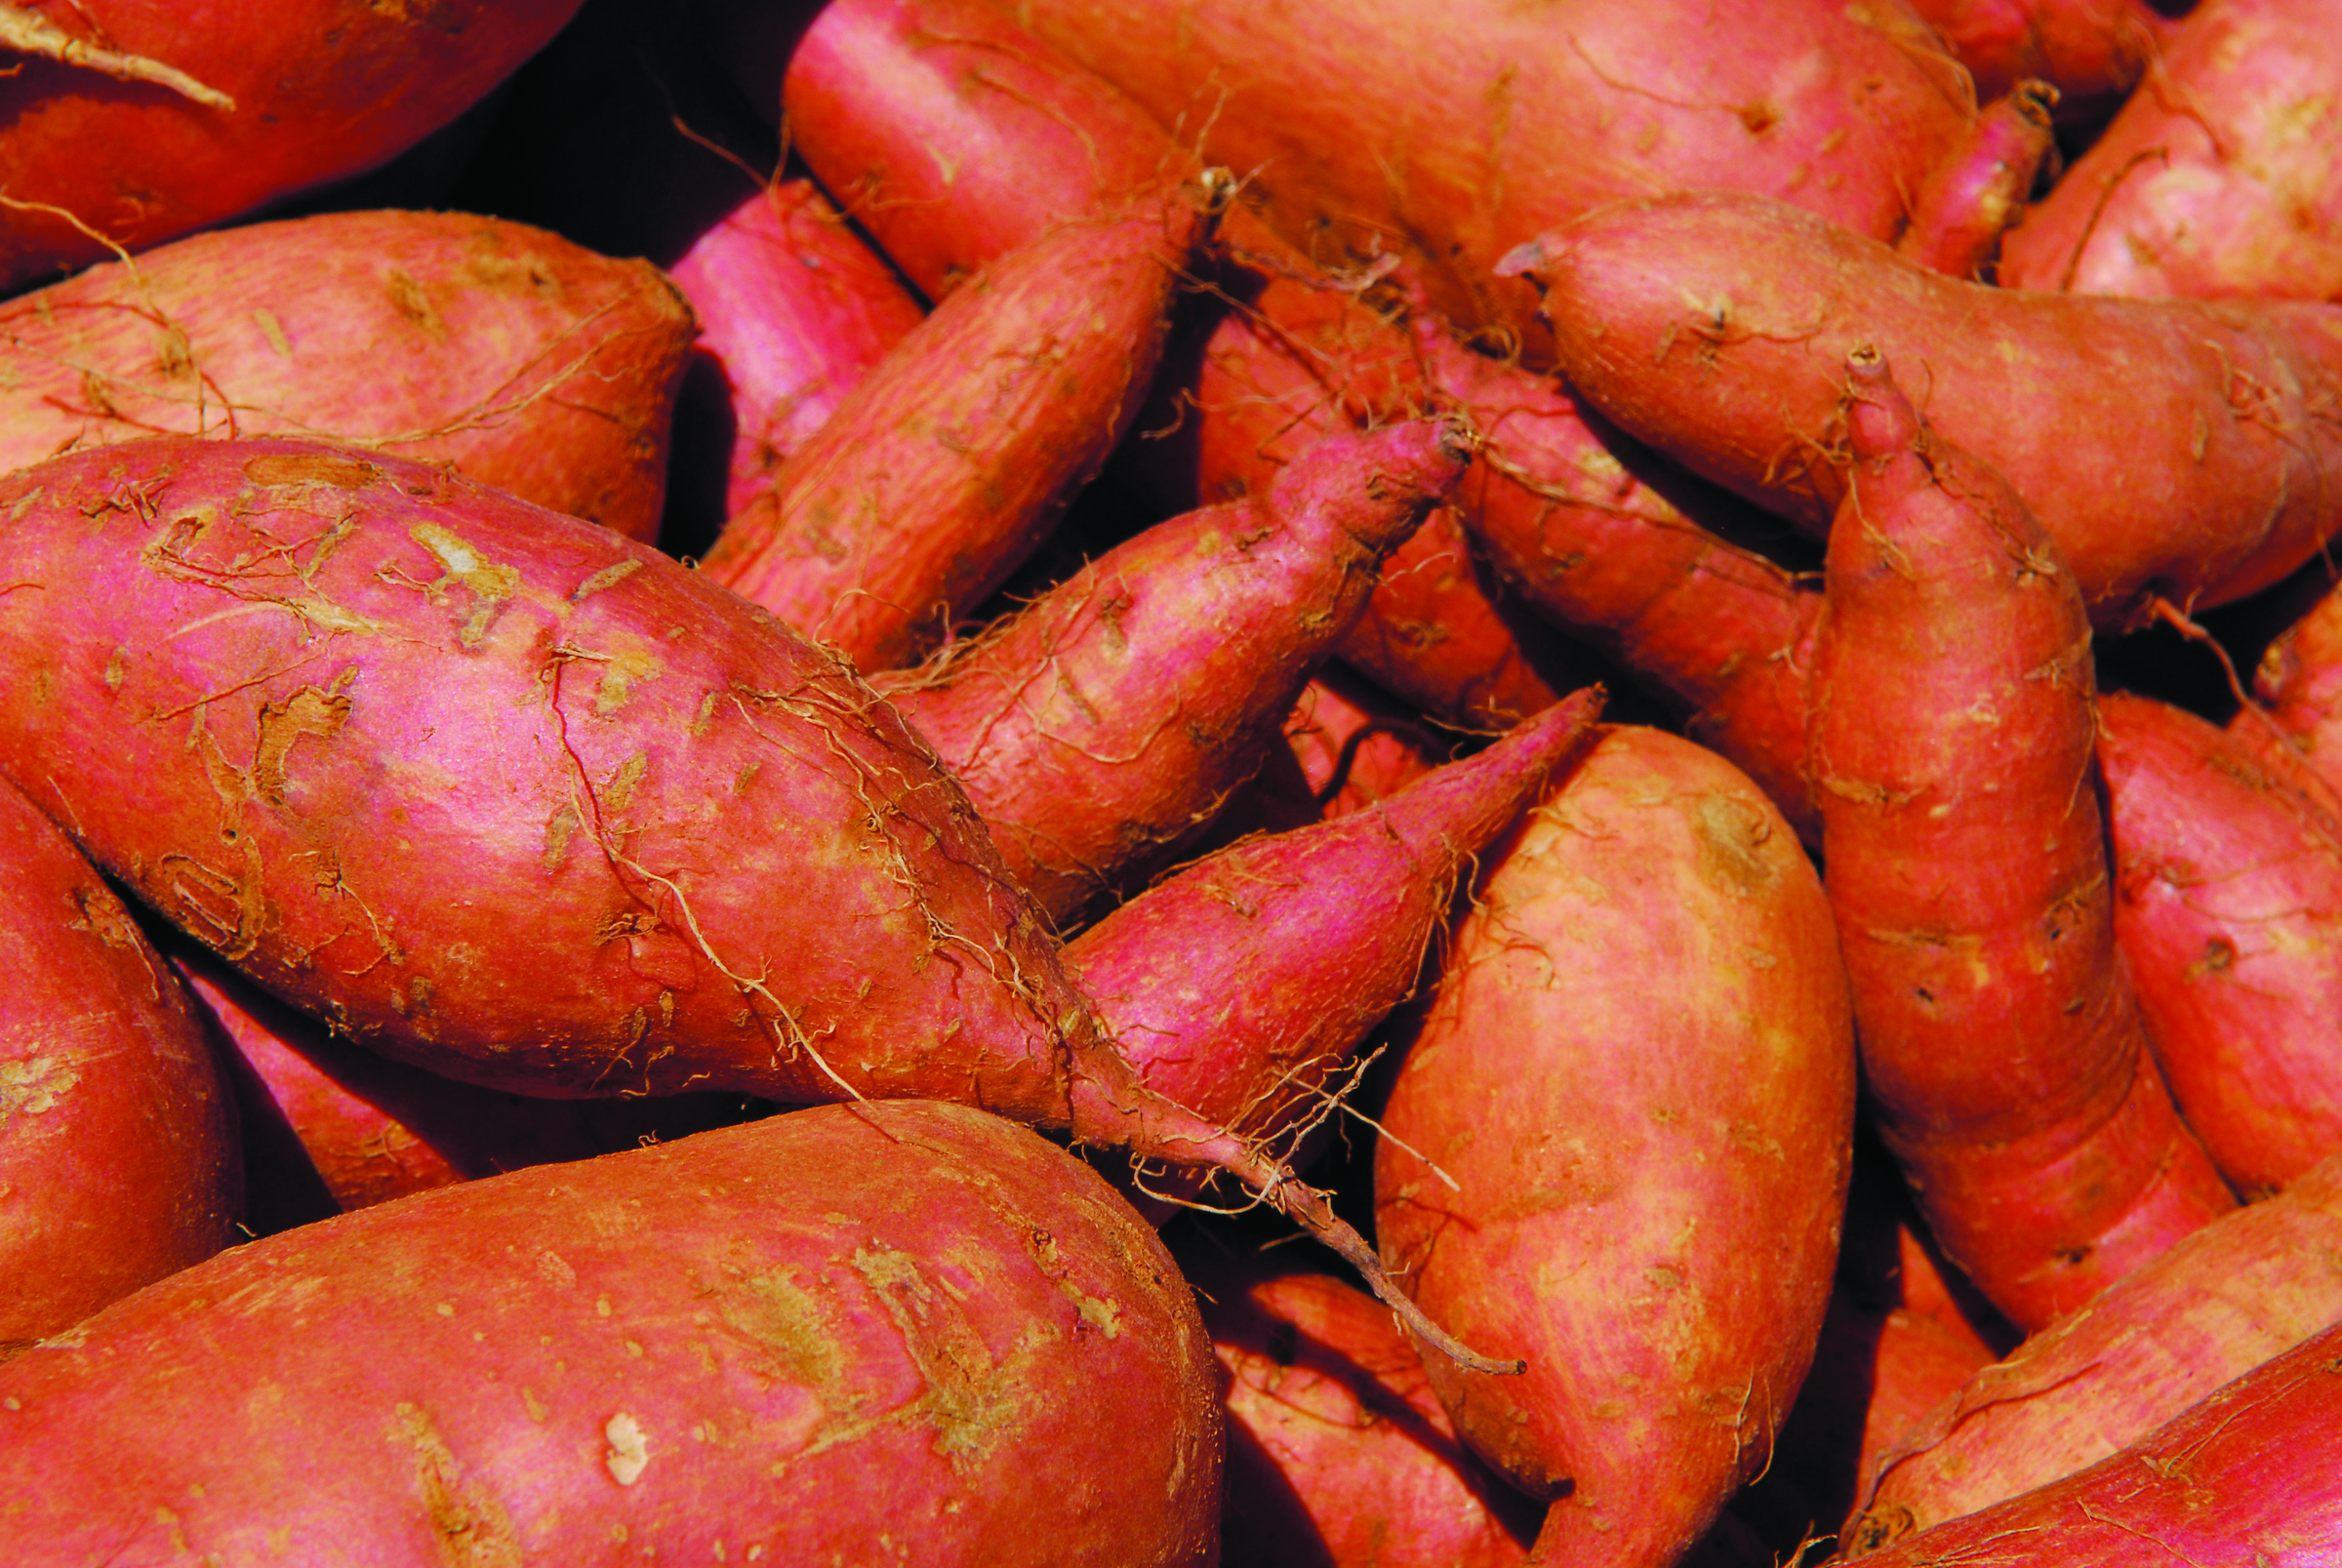 I can't imagine living without sweet potatoes. They provide the enjoyment of sweetness without the headache or the health complications.